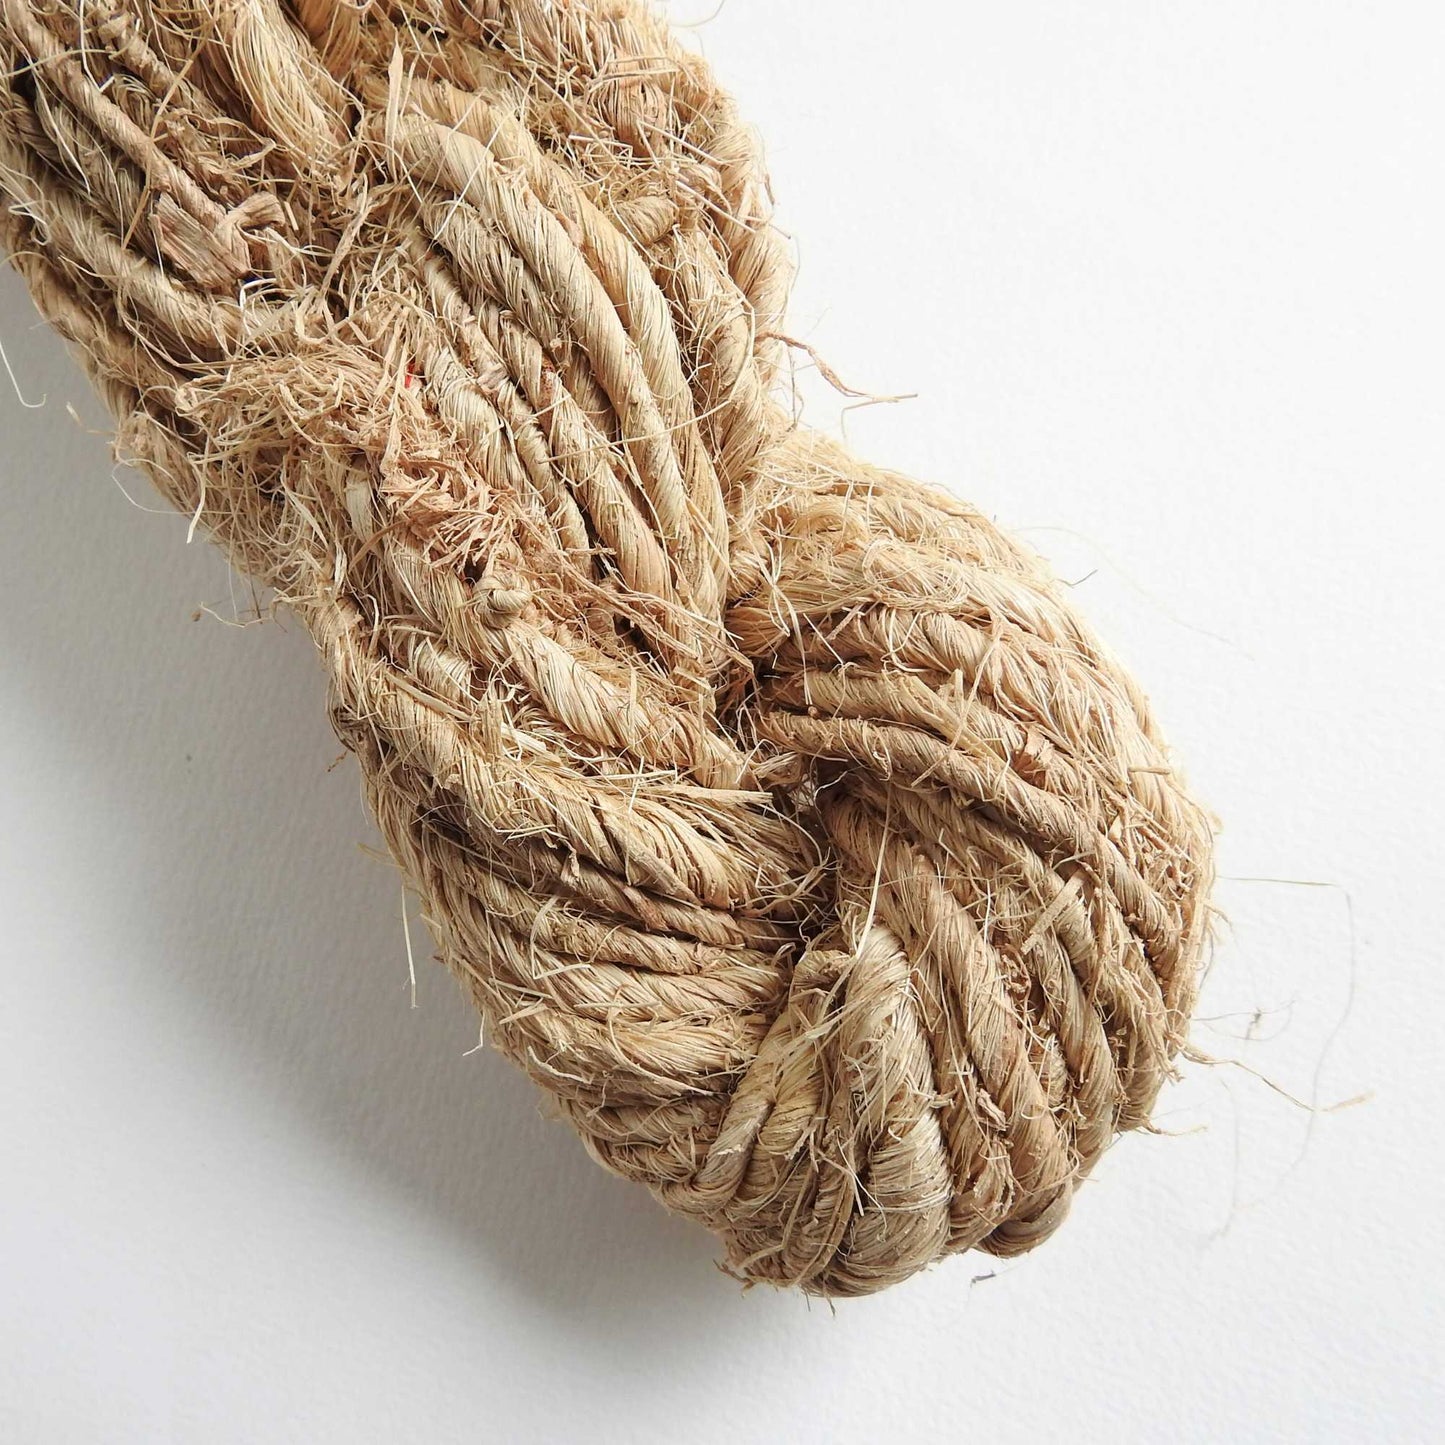 
                  
                    a skein of natural and unprocessed banana yarn. Raw Banana yarn which is handspun and great for baskets, weaving, mats
                  
                